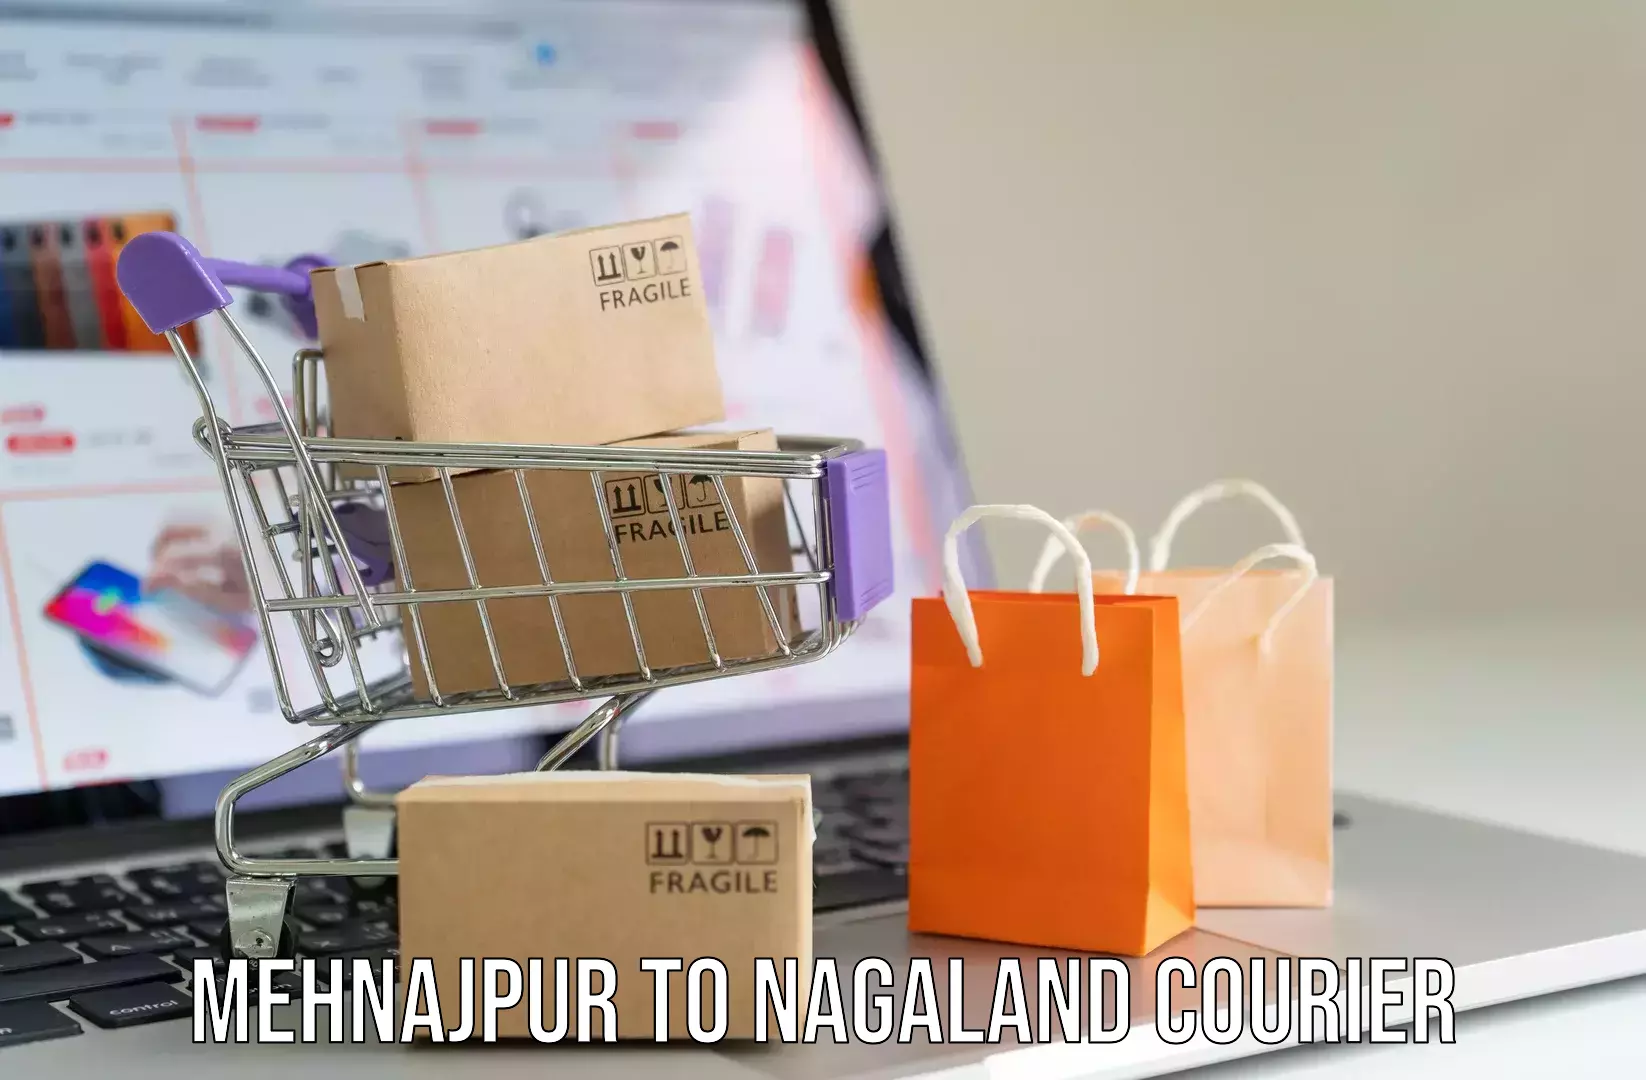 Baggage transport technology Mehnajpur to Nagaland